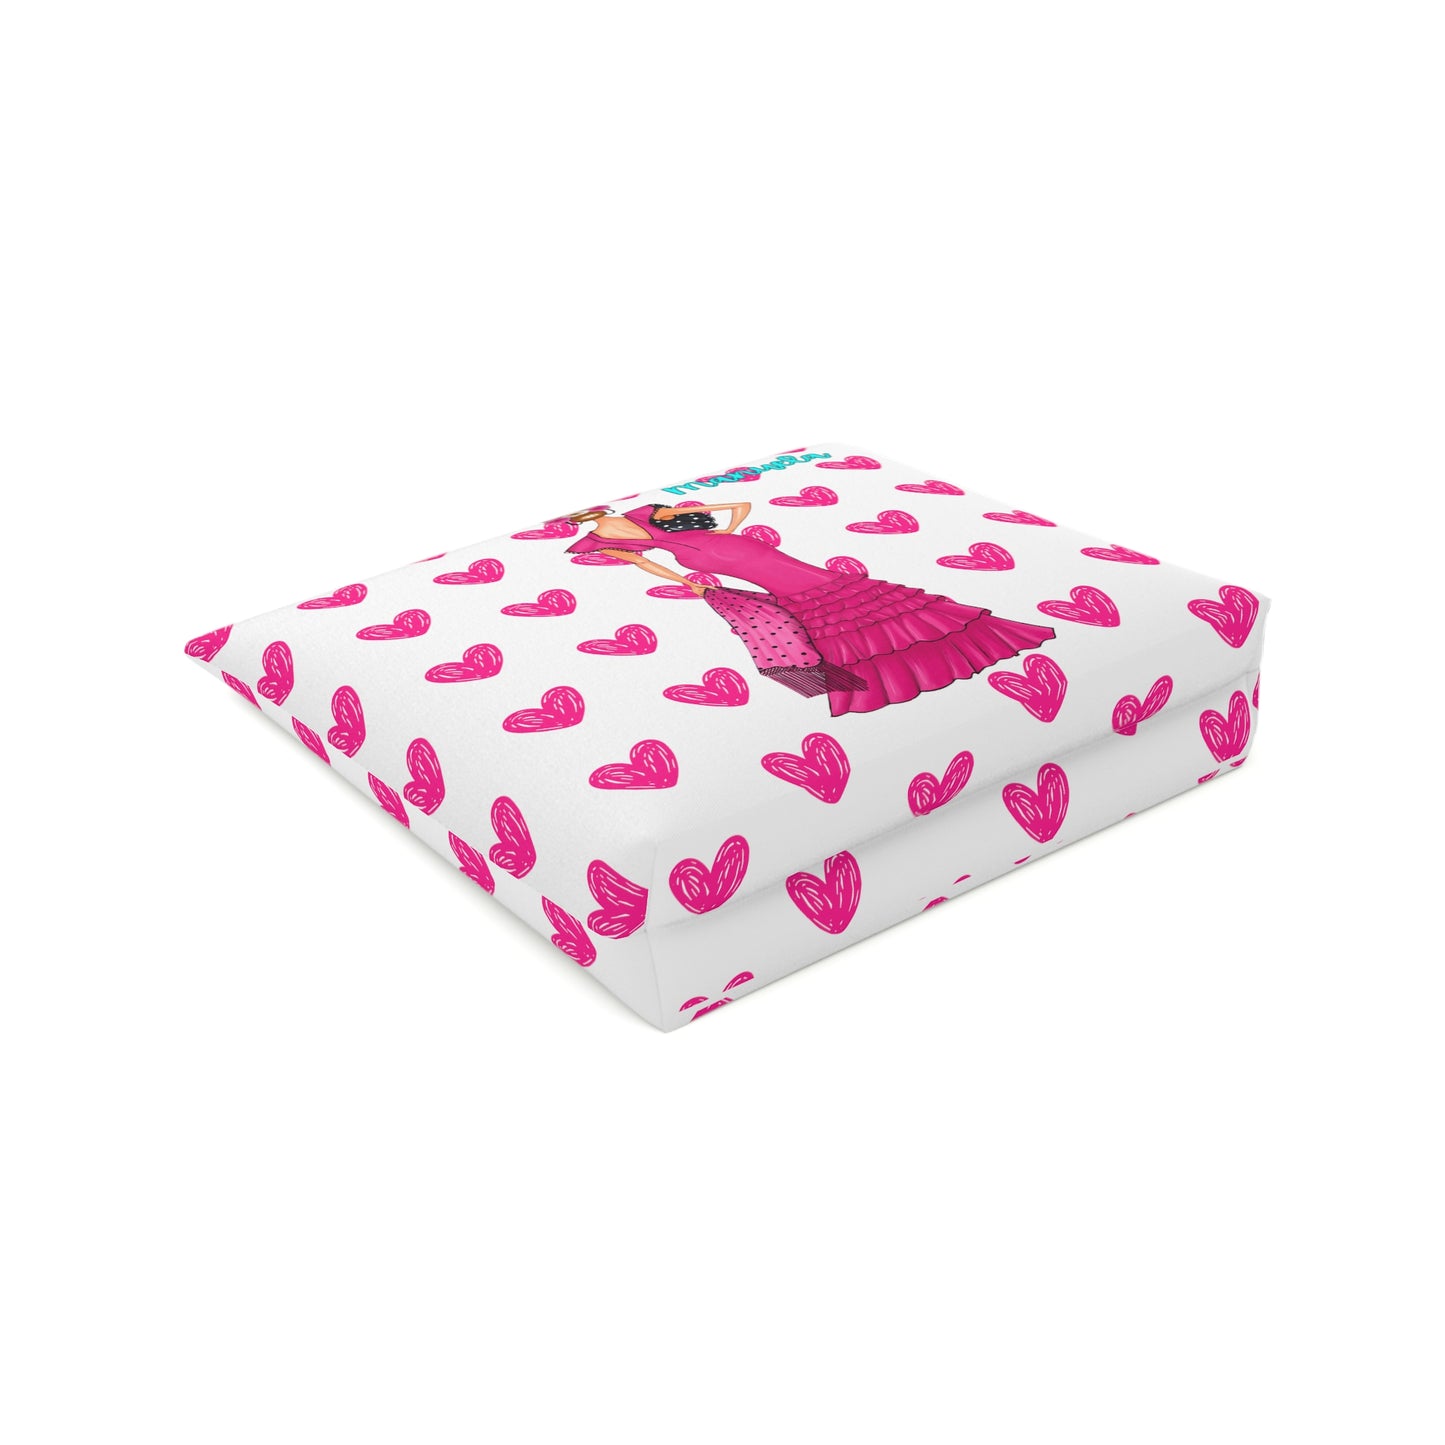 a pink and white box with hearts on it